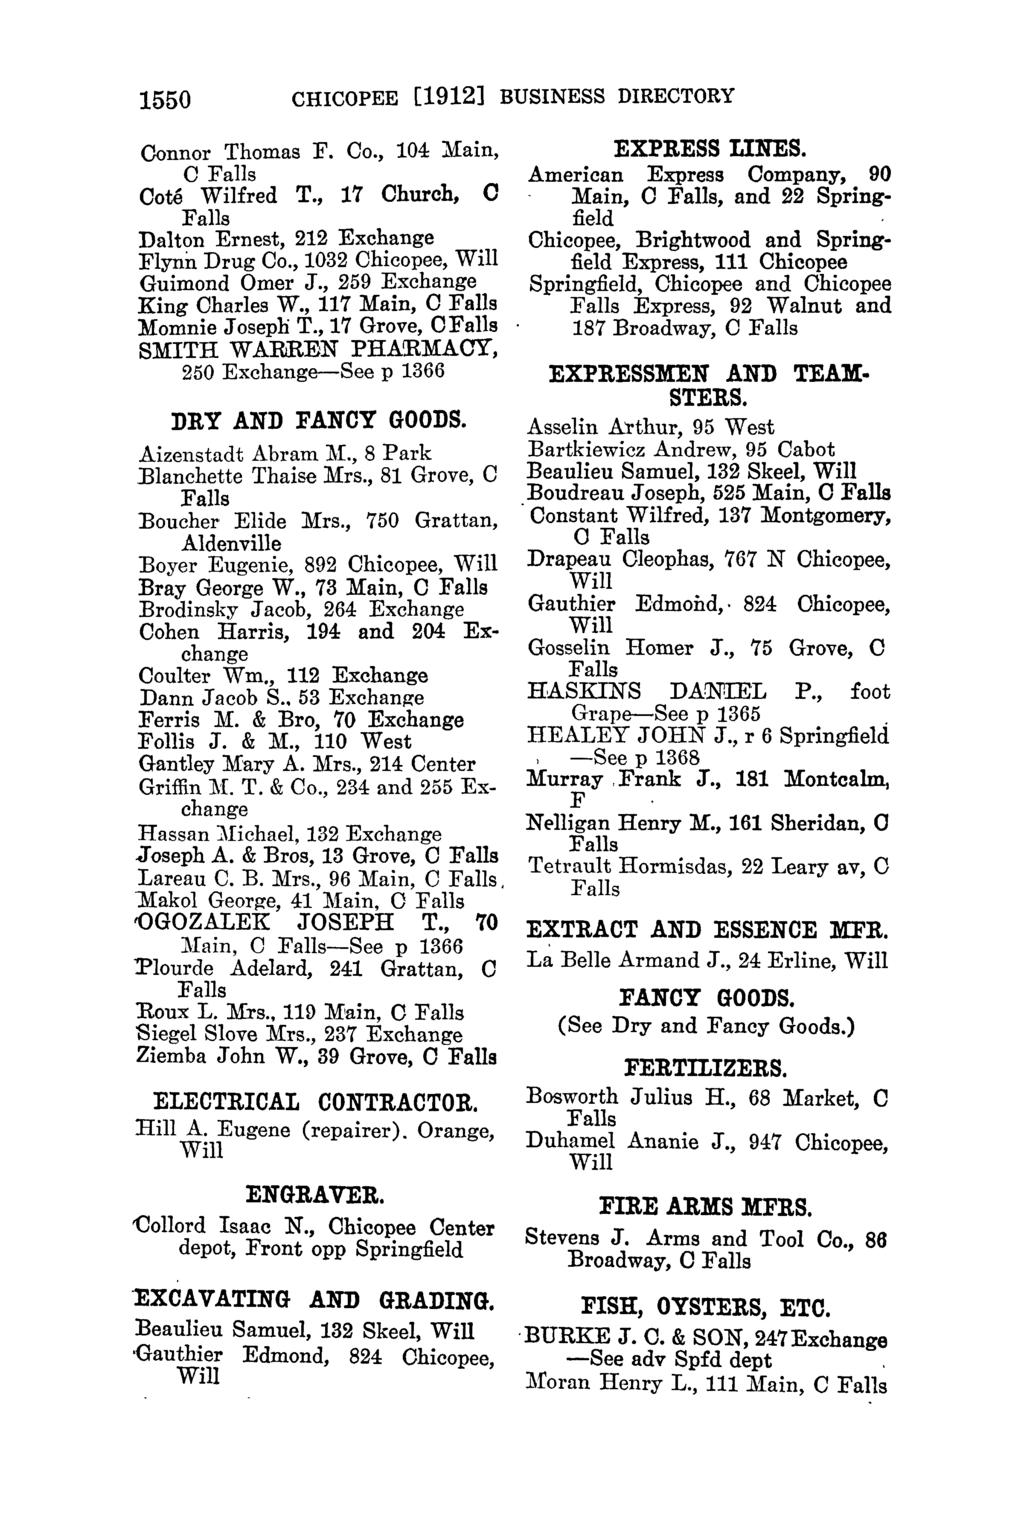 1550 CHICOPEE [1912] BUSINESS DIRECTORY Connor Thomas F. Co., 104 Main, Cote Wilfred T., 17 Church, C Dalton Ernest, 212 Exchange Flynn Drug Co., 1032 Chicopee, Guimond Omer J.